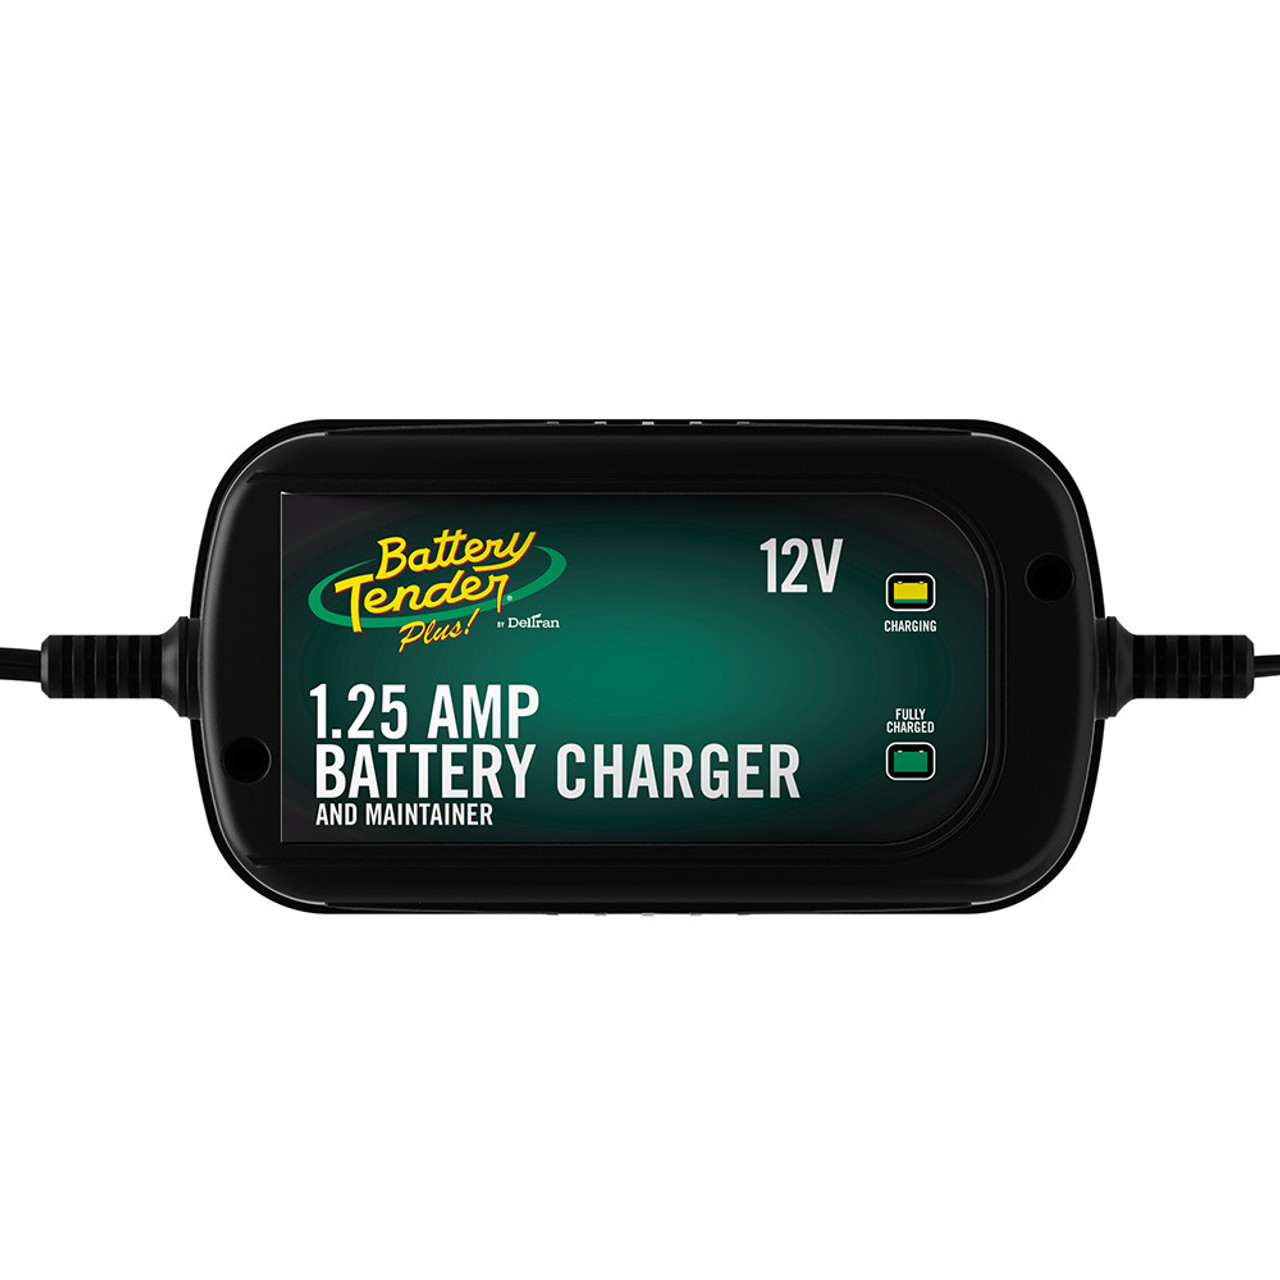 Battery Tender® 022-0185G-DL-WH Battery Charger (12 Pieces) - 12V, 1.25 AMP High Efficiency